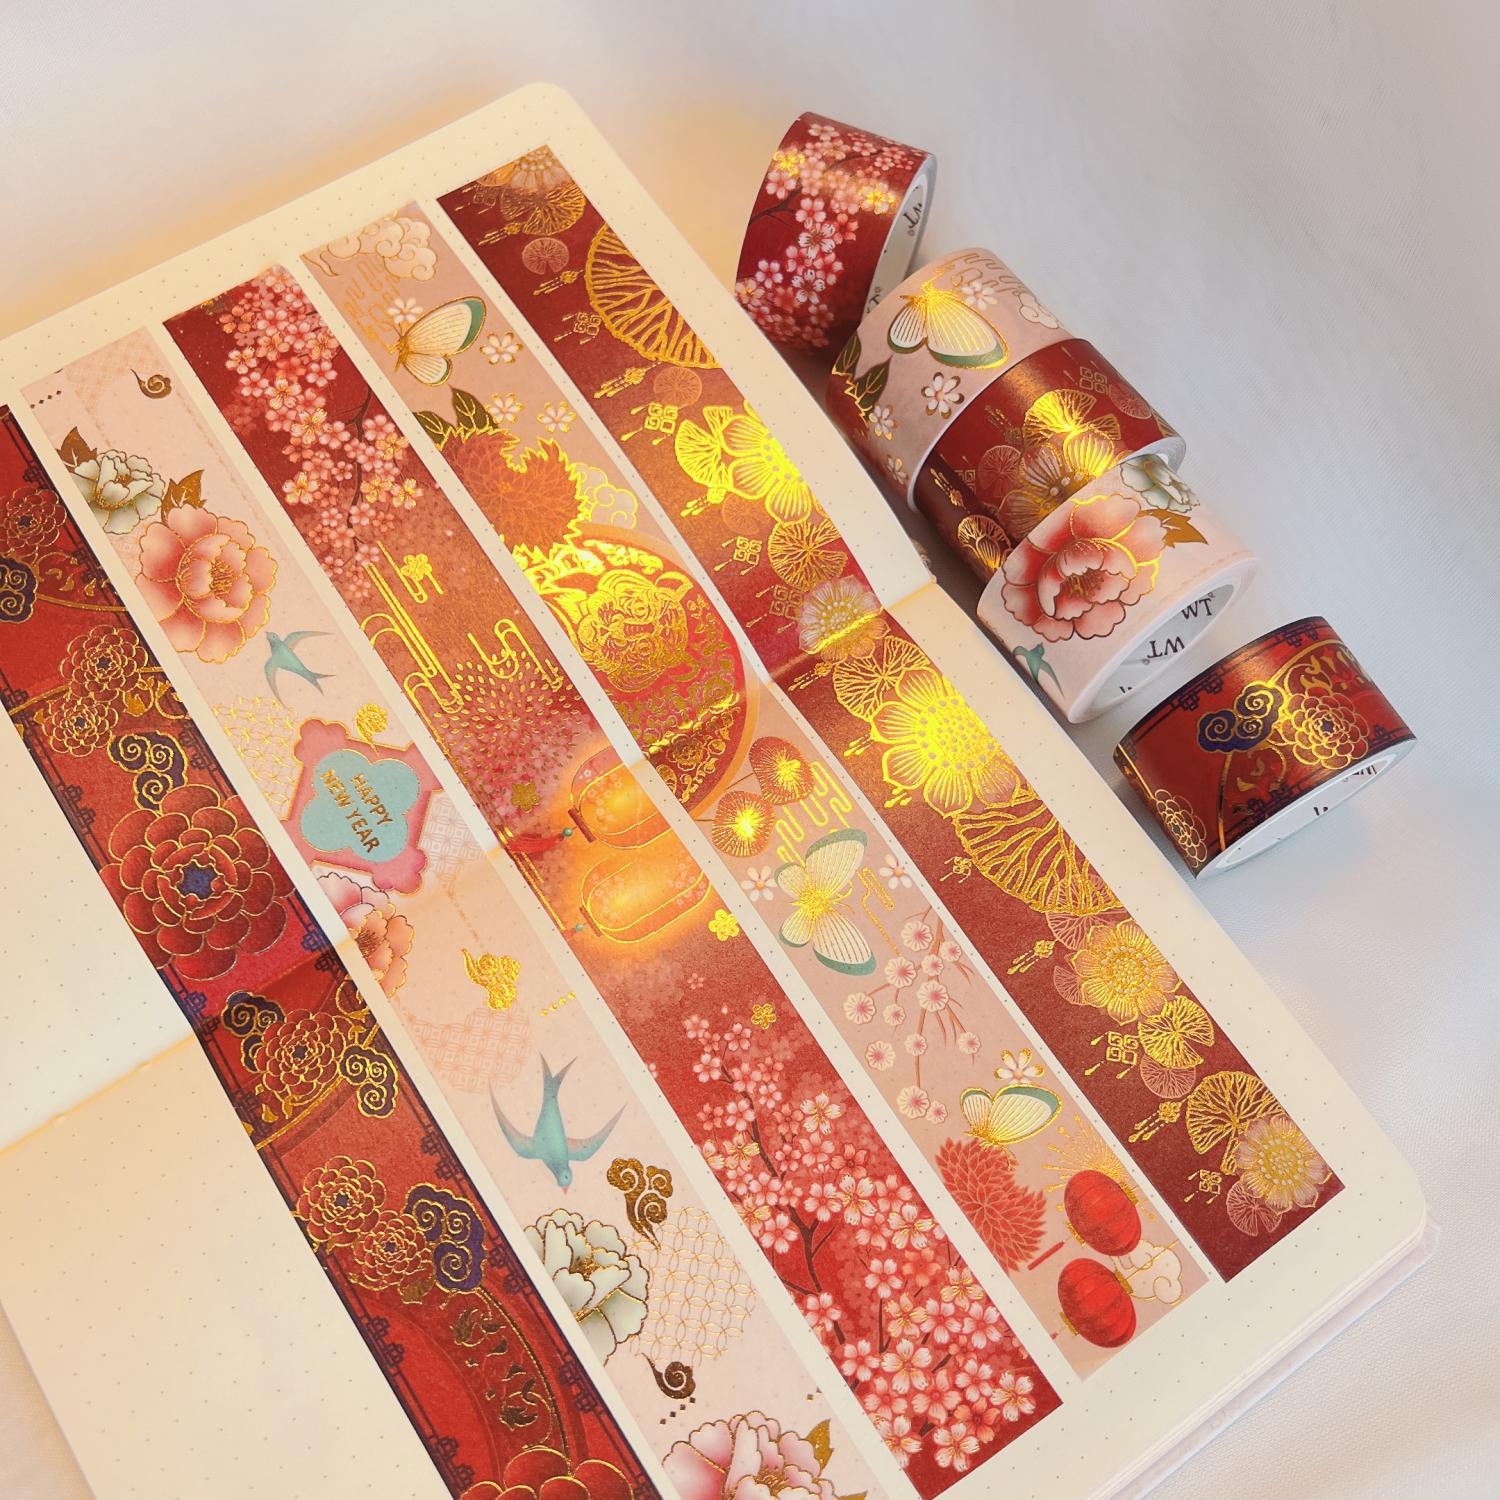 Year of the Tiger Washi Tape Set | The Washi Tape Shop. Beautiful Washi and Decorative Tape For Bullet Journals, Gift Wrapping, Planner Decoration and DIY Projects